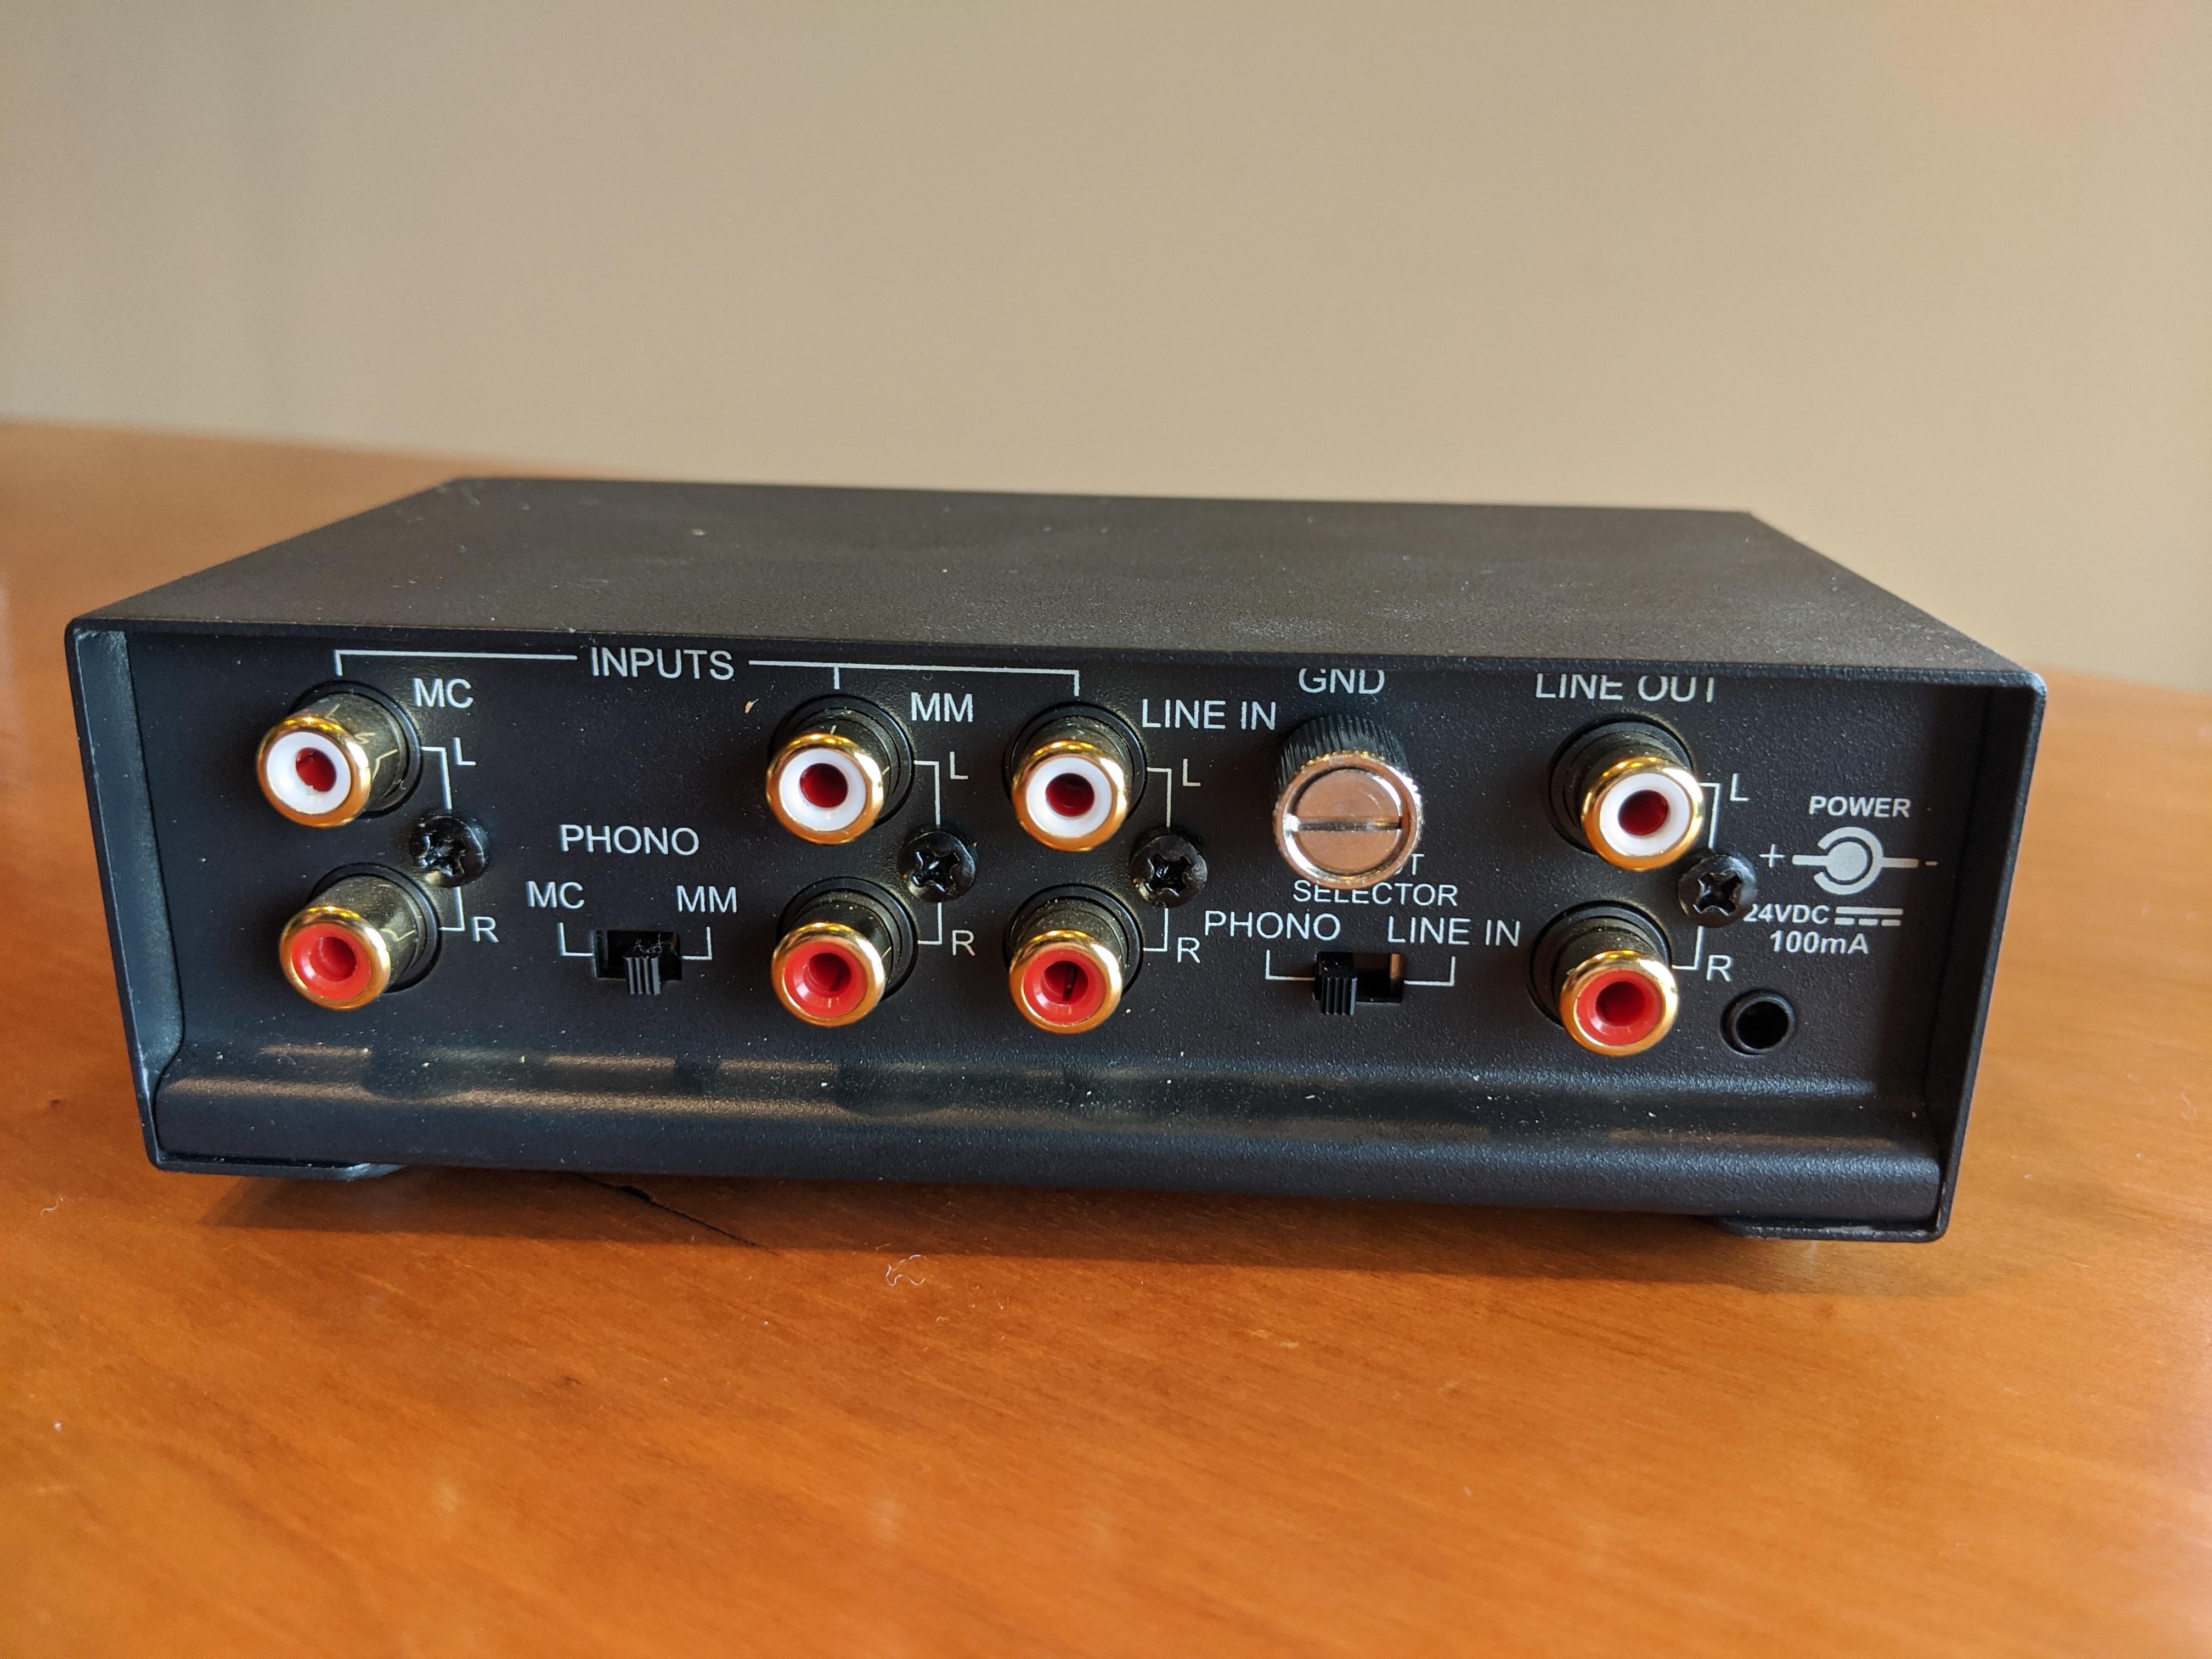 Digitize your PP 3i for sale - Buy & Sell Audio and Computer Components - Audiophile Style